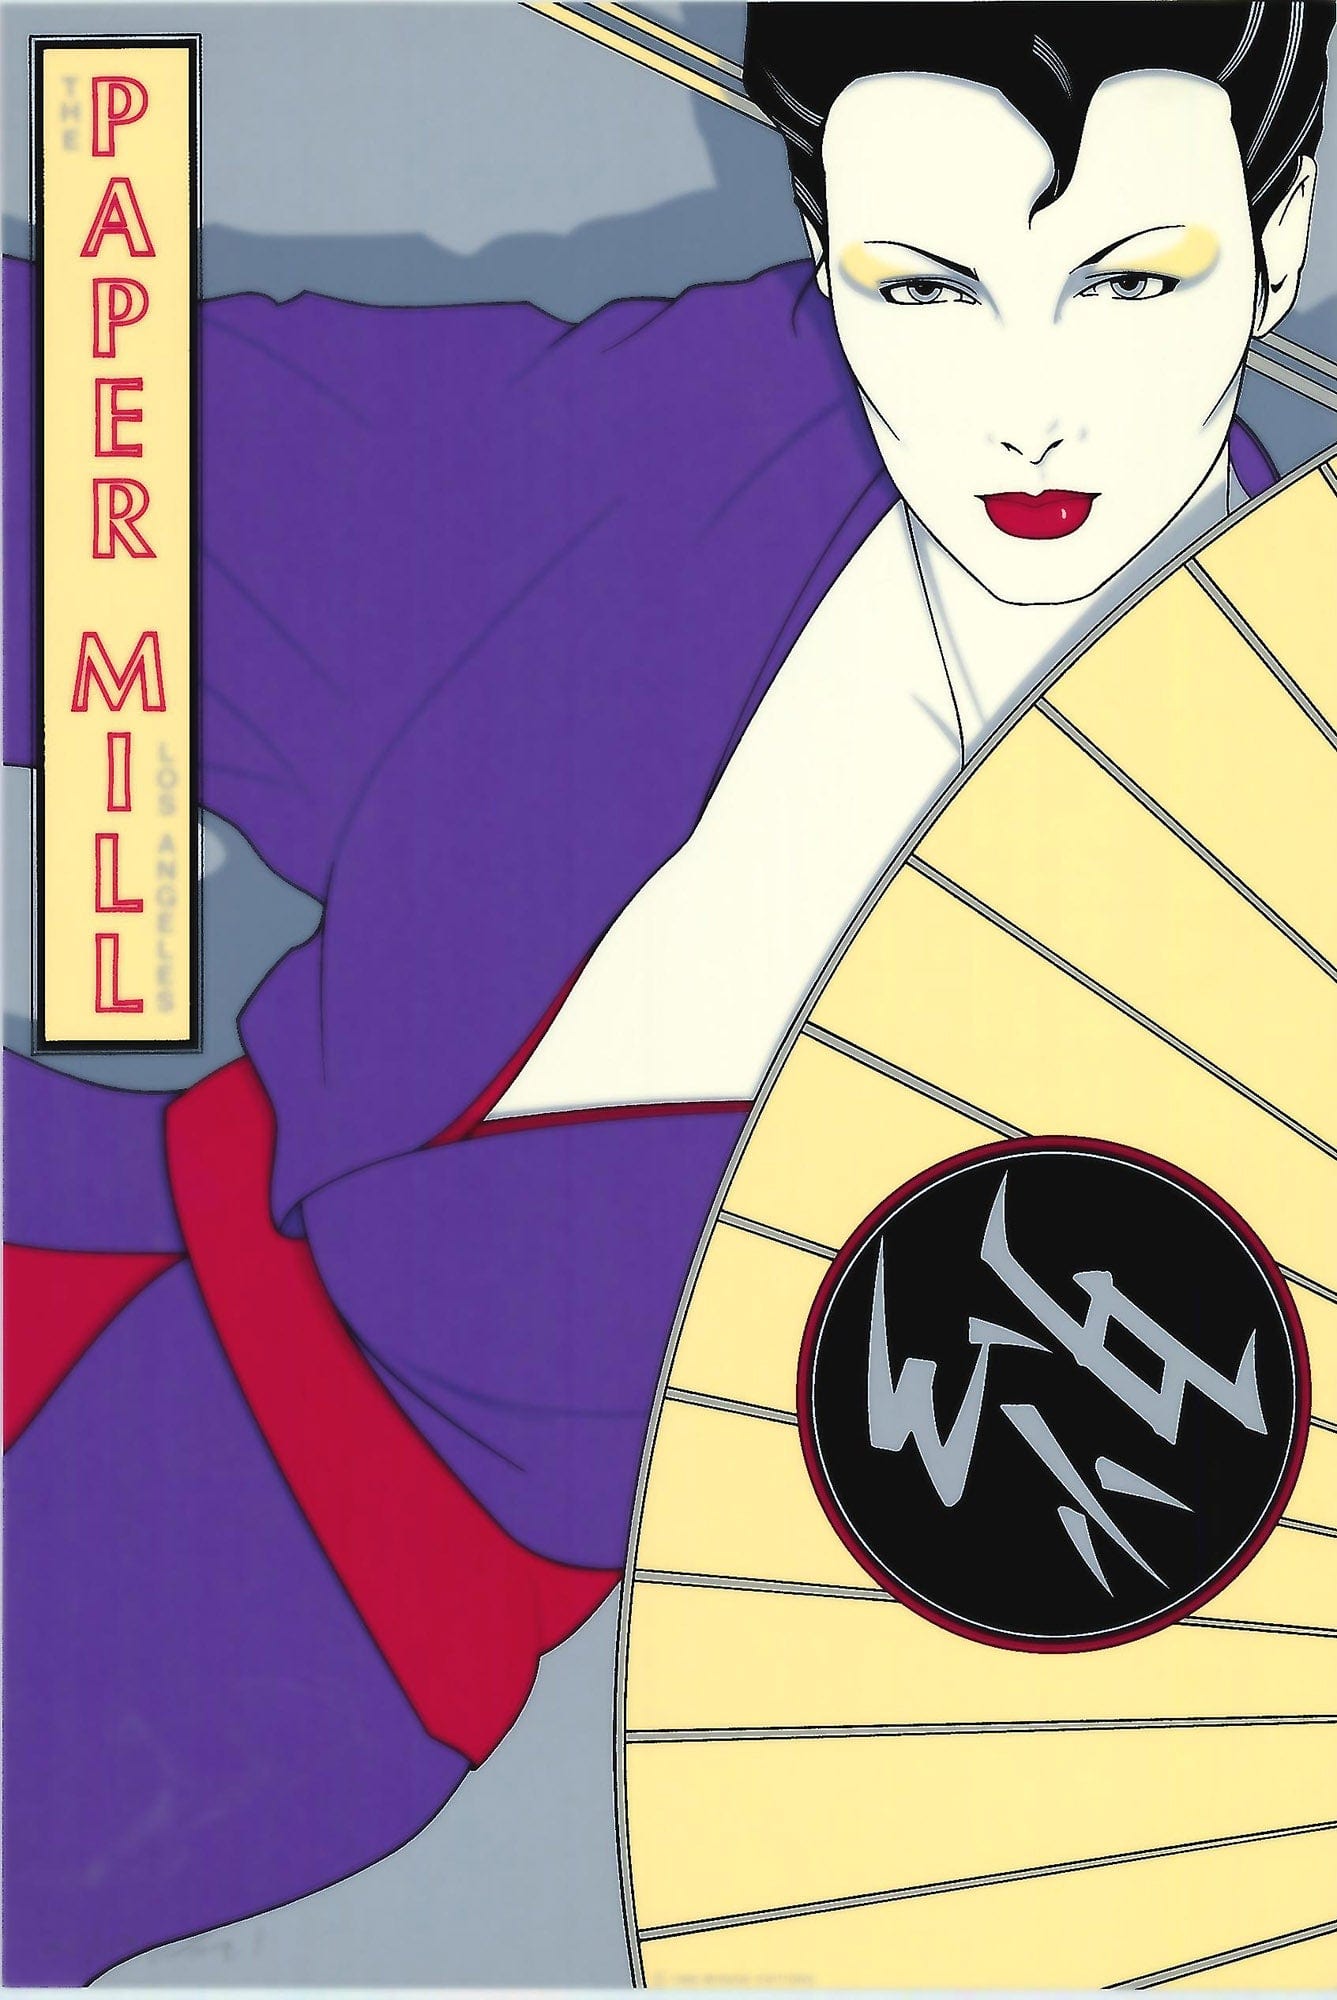 Patrick Nagel: The Paper Mill